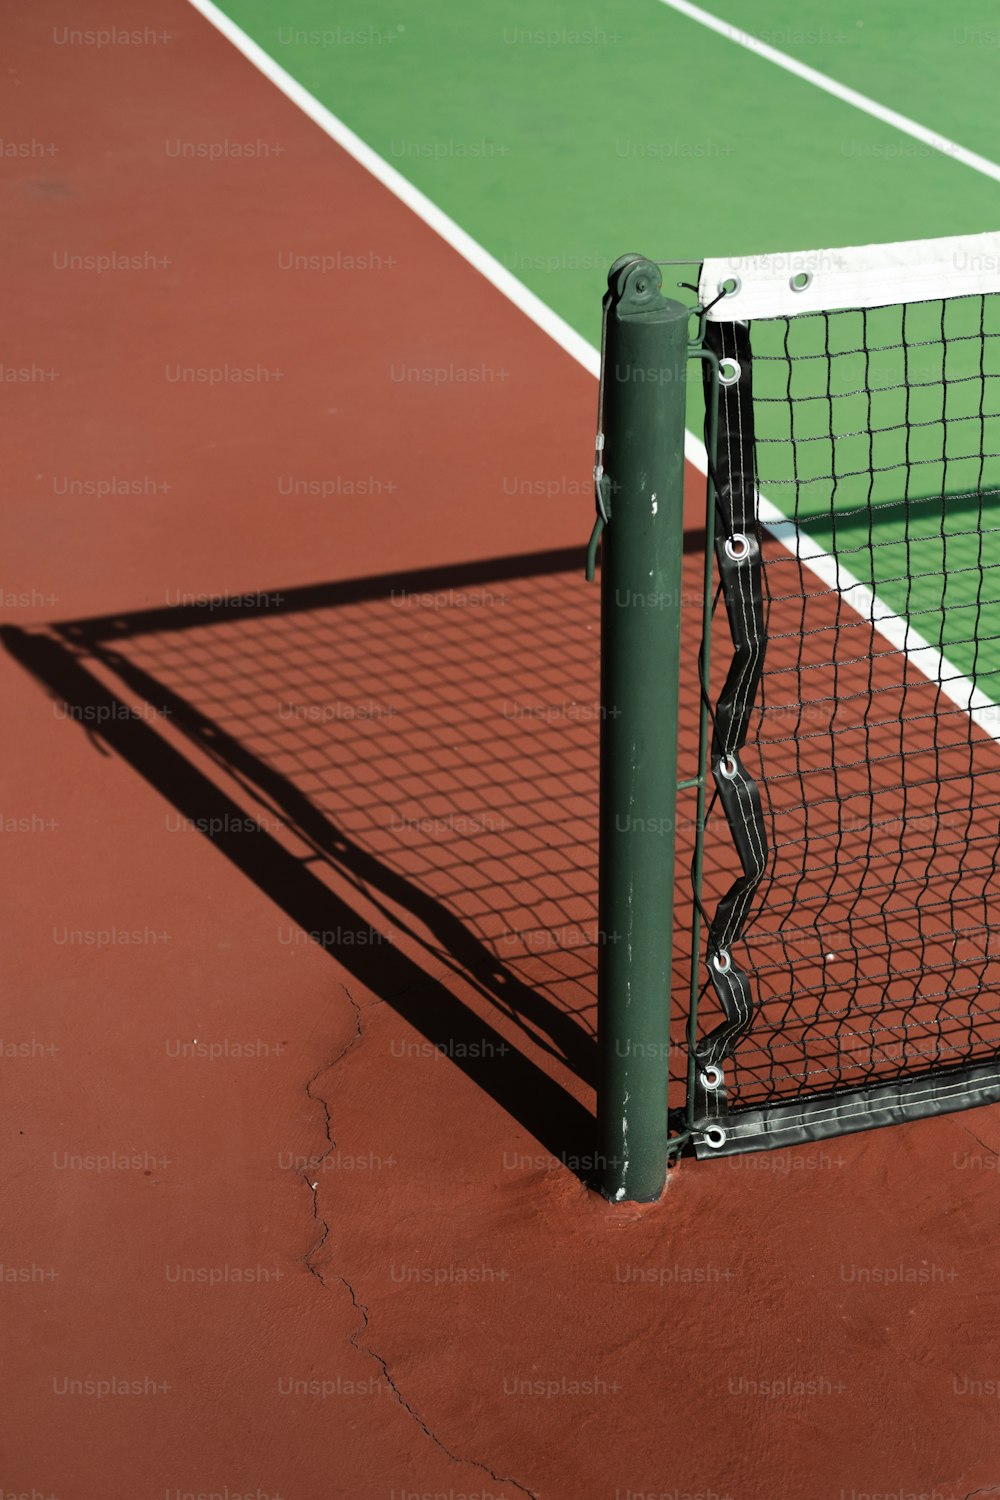 A close up of a tennis net on a tennis court photo – Tennis Image on  Unsplash